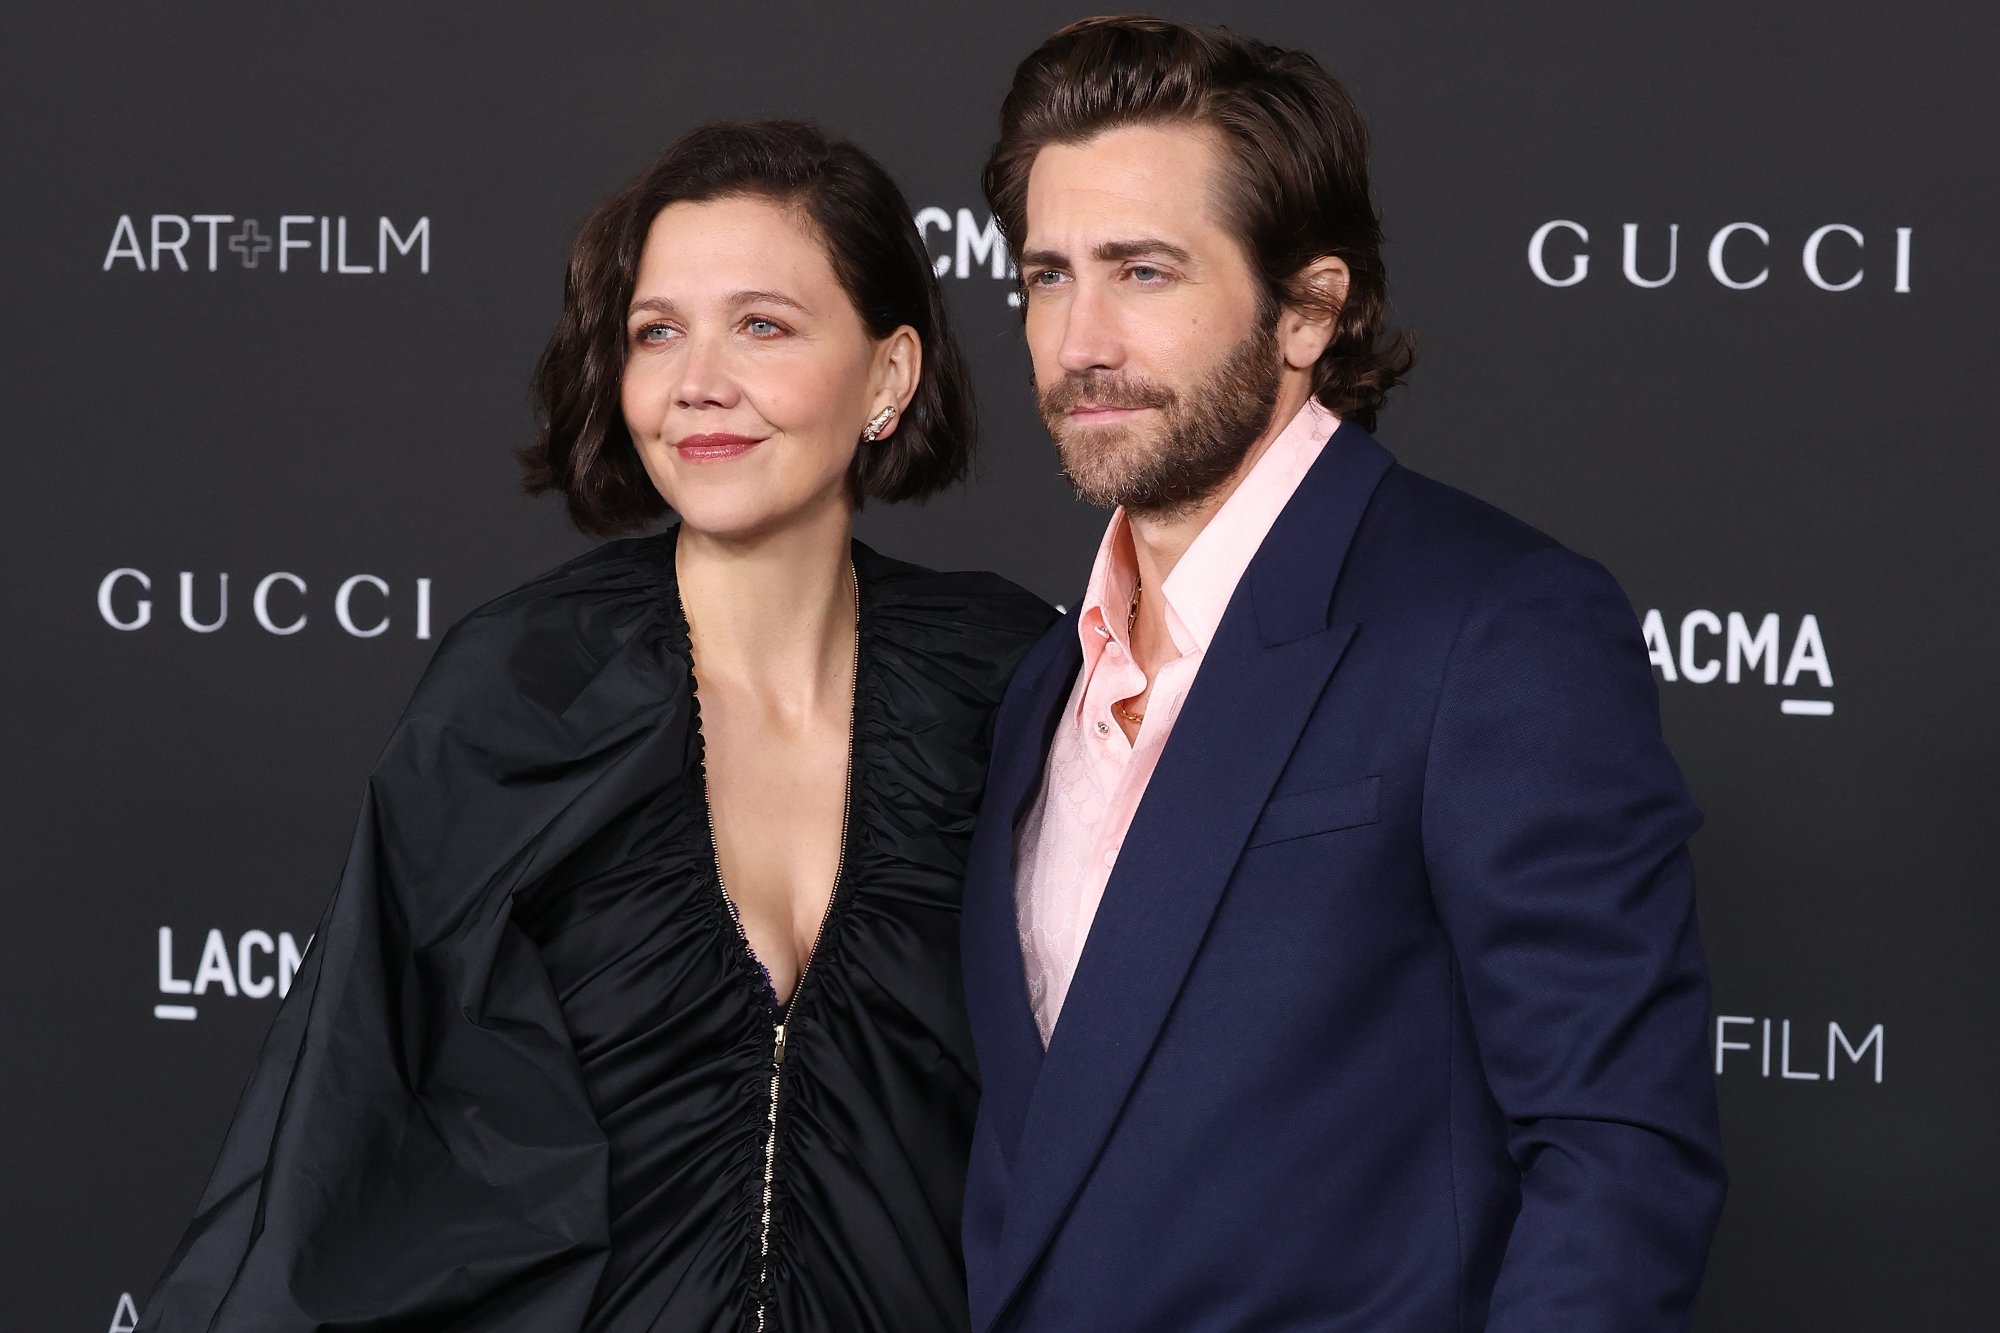 'The Lost Daughter' Maggie Gyllenhaal and Jake Gyllenhaal in front of a Gucci step and repeat